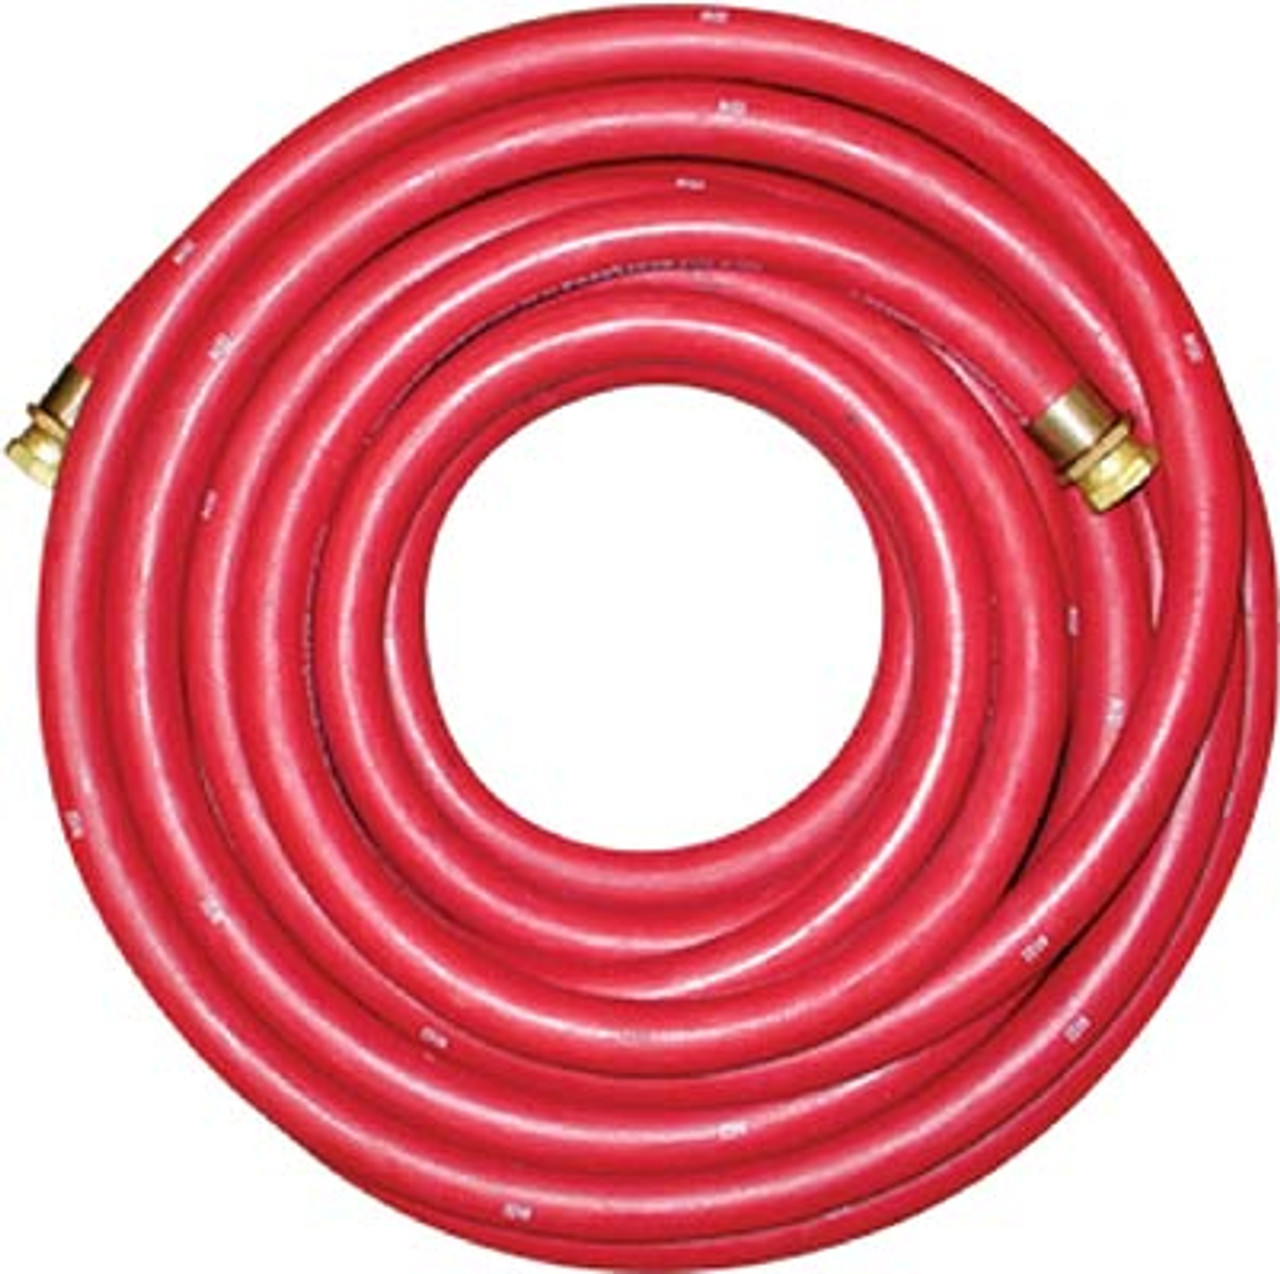 PIH-FT-RD75 - 1.25" by 75' Redwing ContiTech Curb Hose Assembly